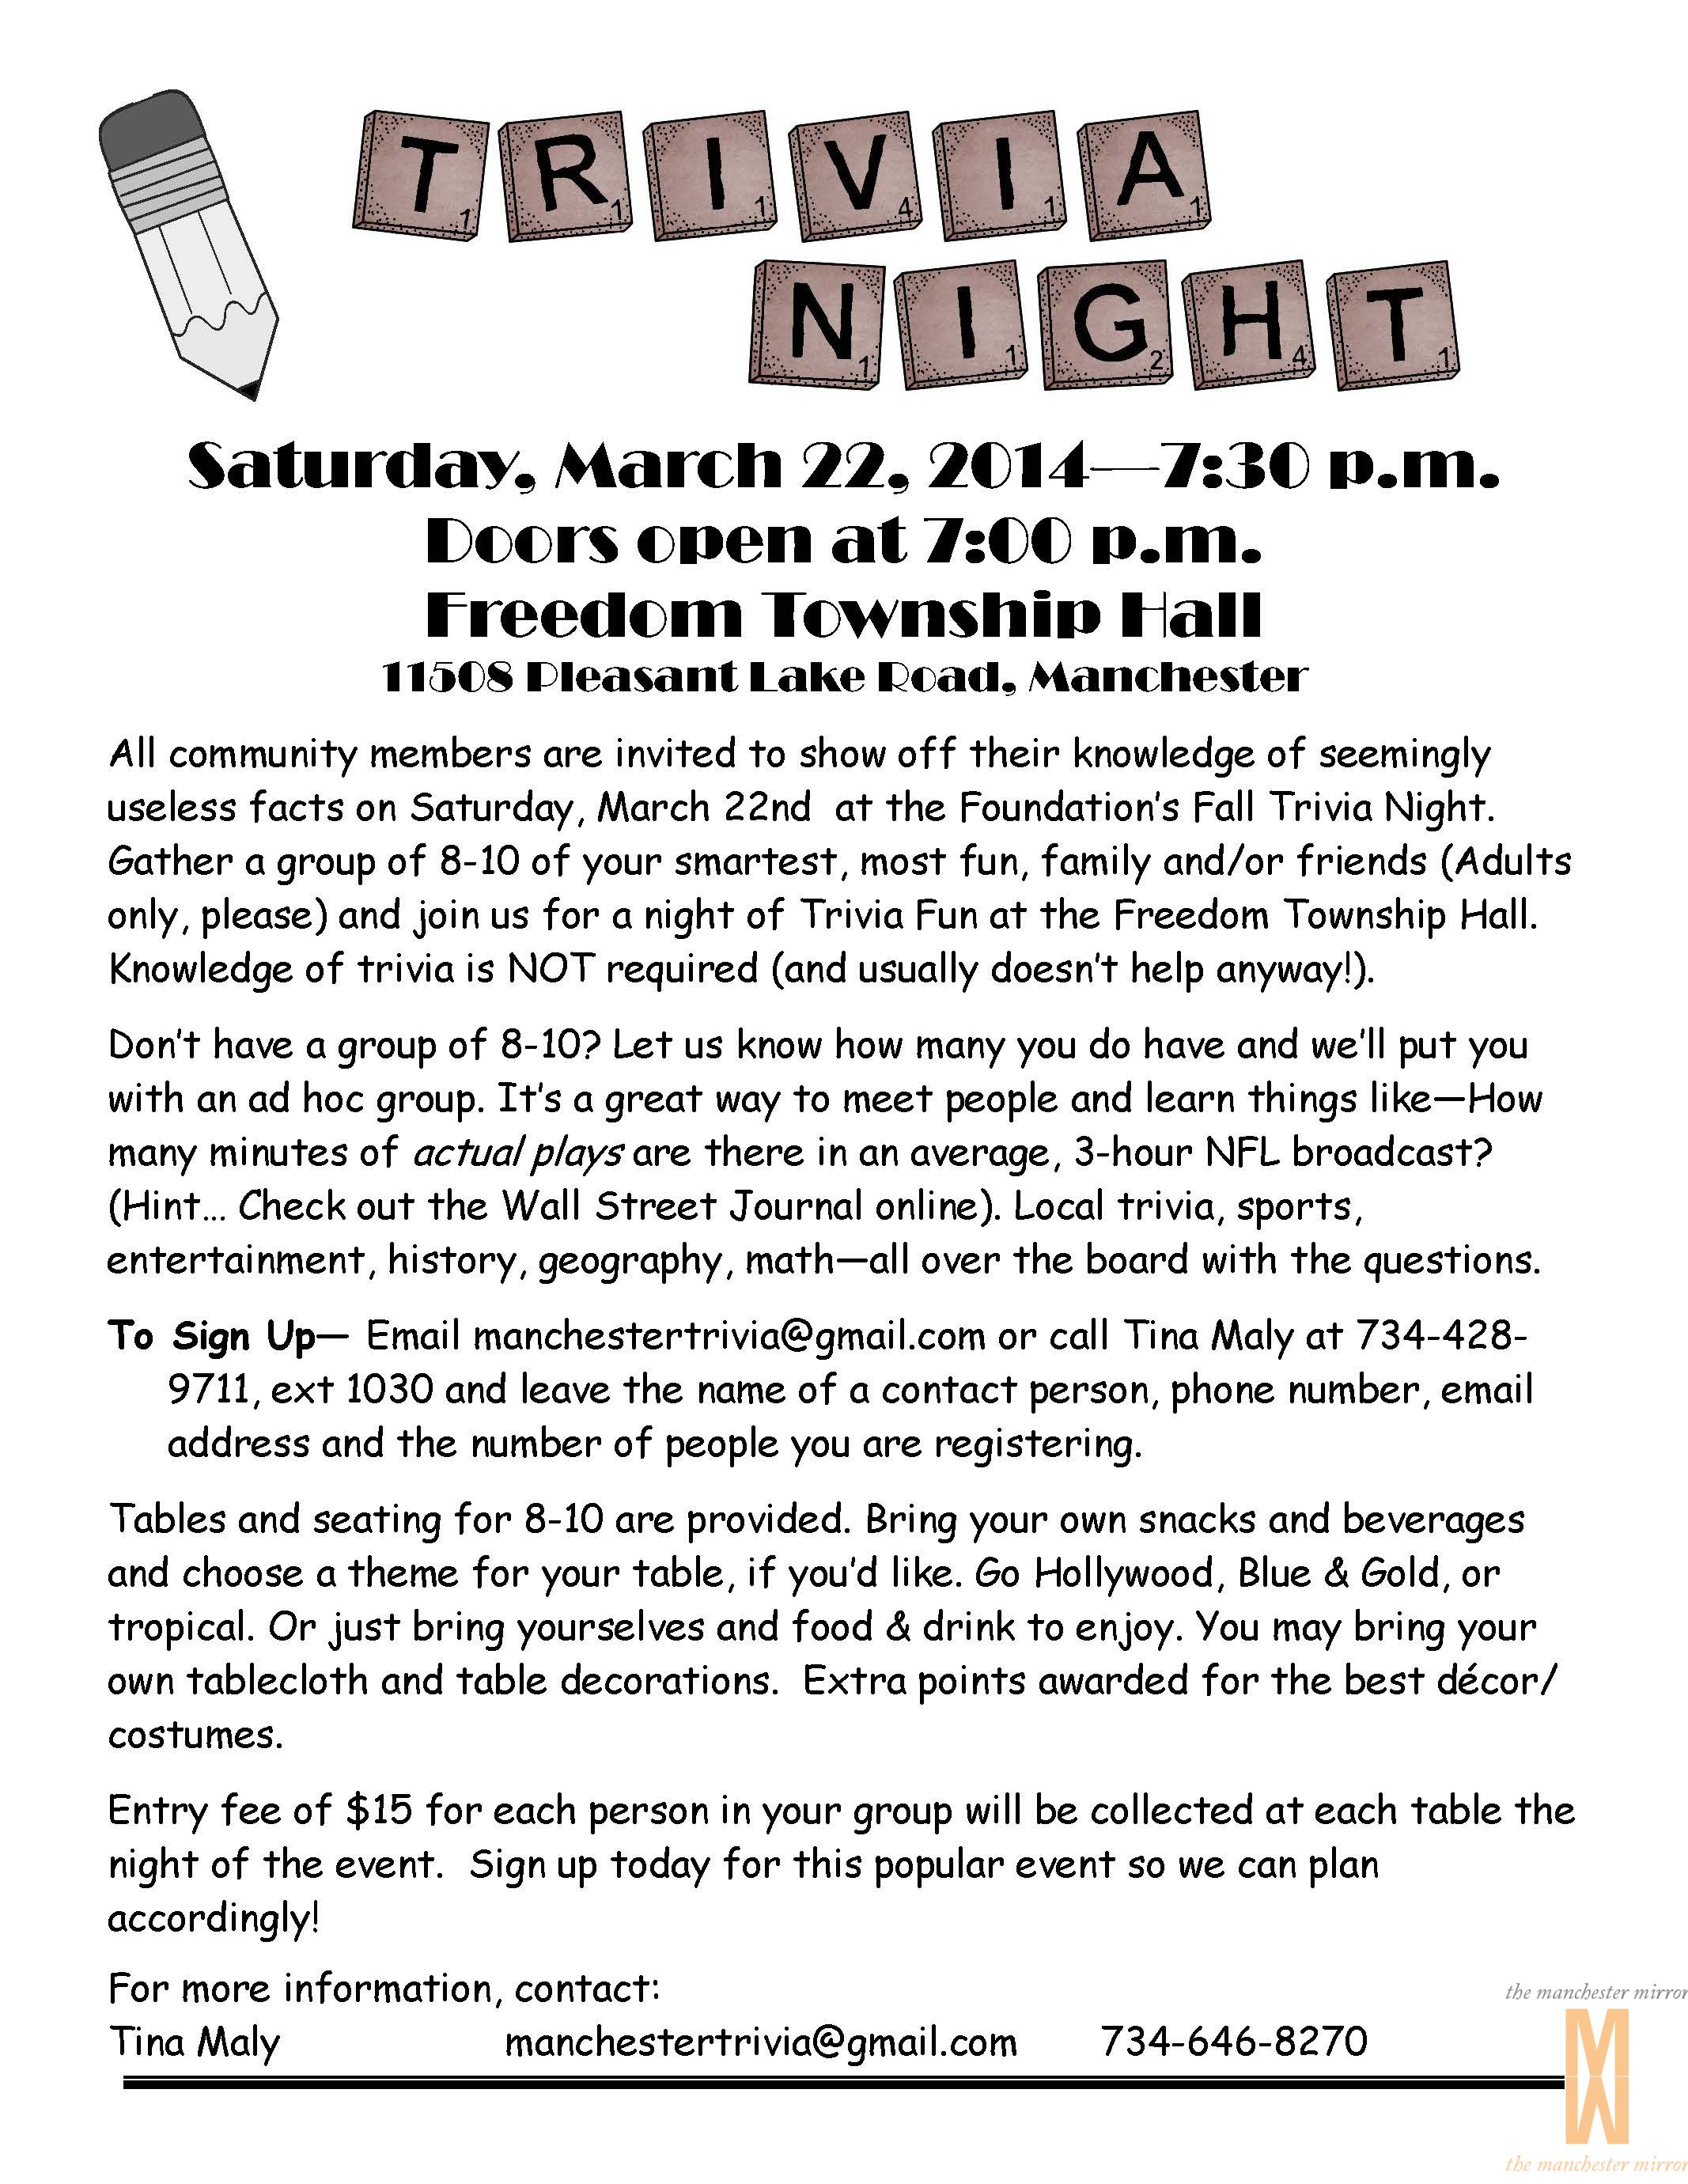 trivia night flyer-March2014_Page_1